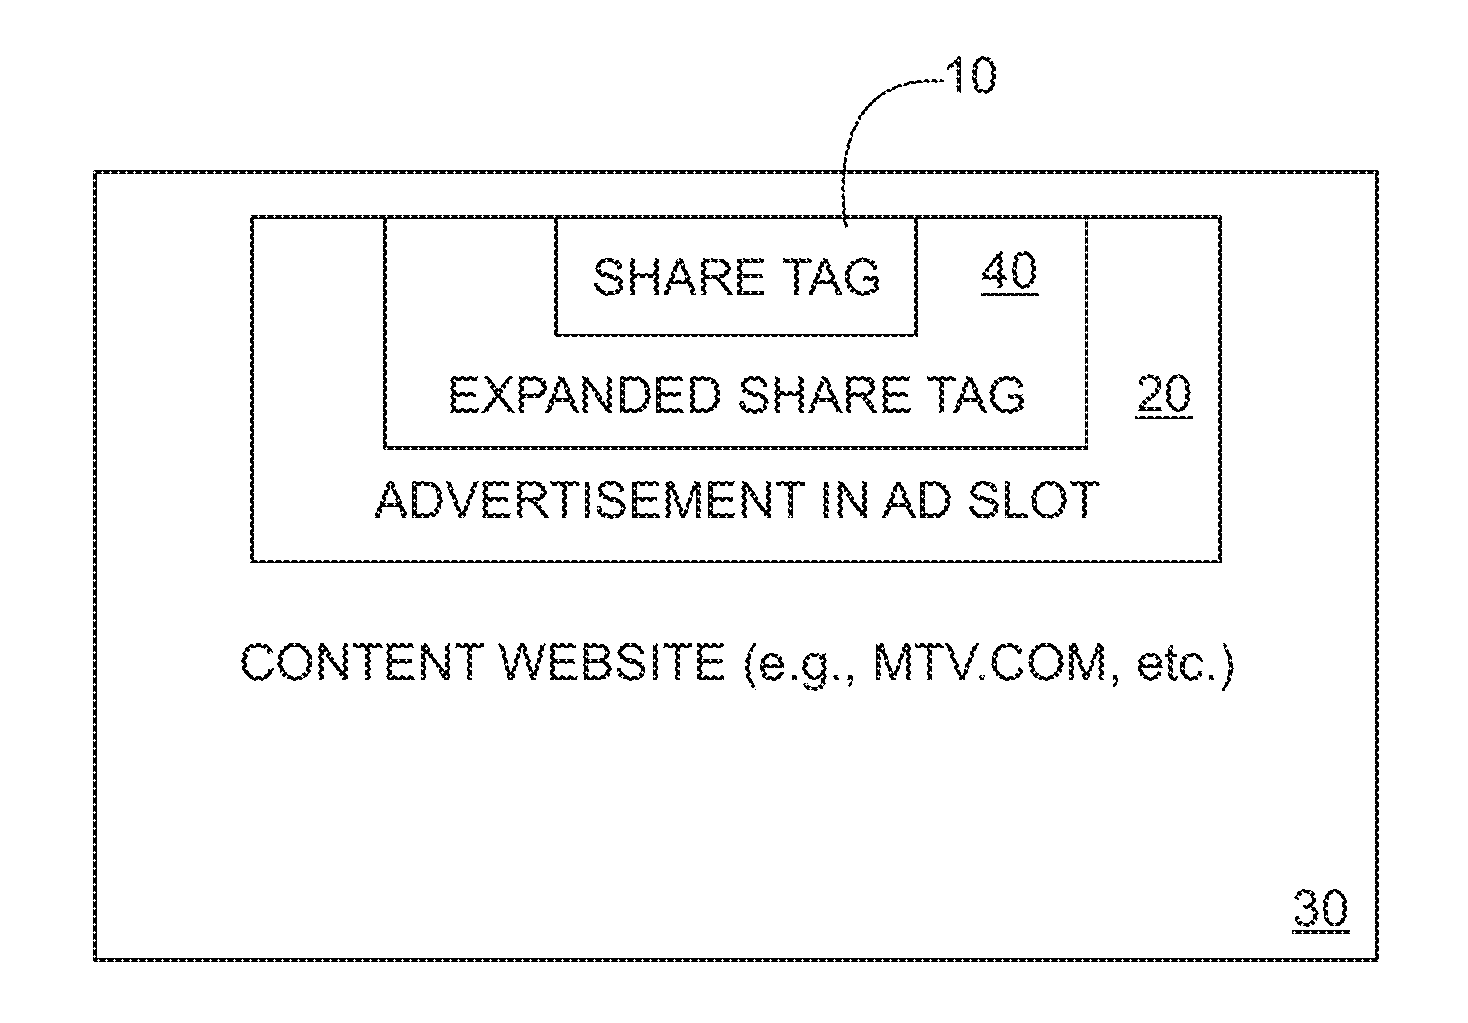 System and Method to Enable any Internet-Compatible Advertisement to be Fully Shareable to a Wide Variety of Social Media Networks and Platforms